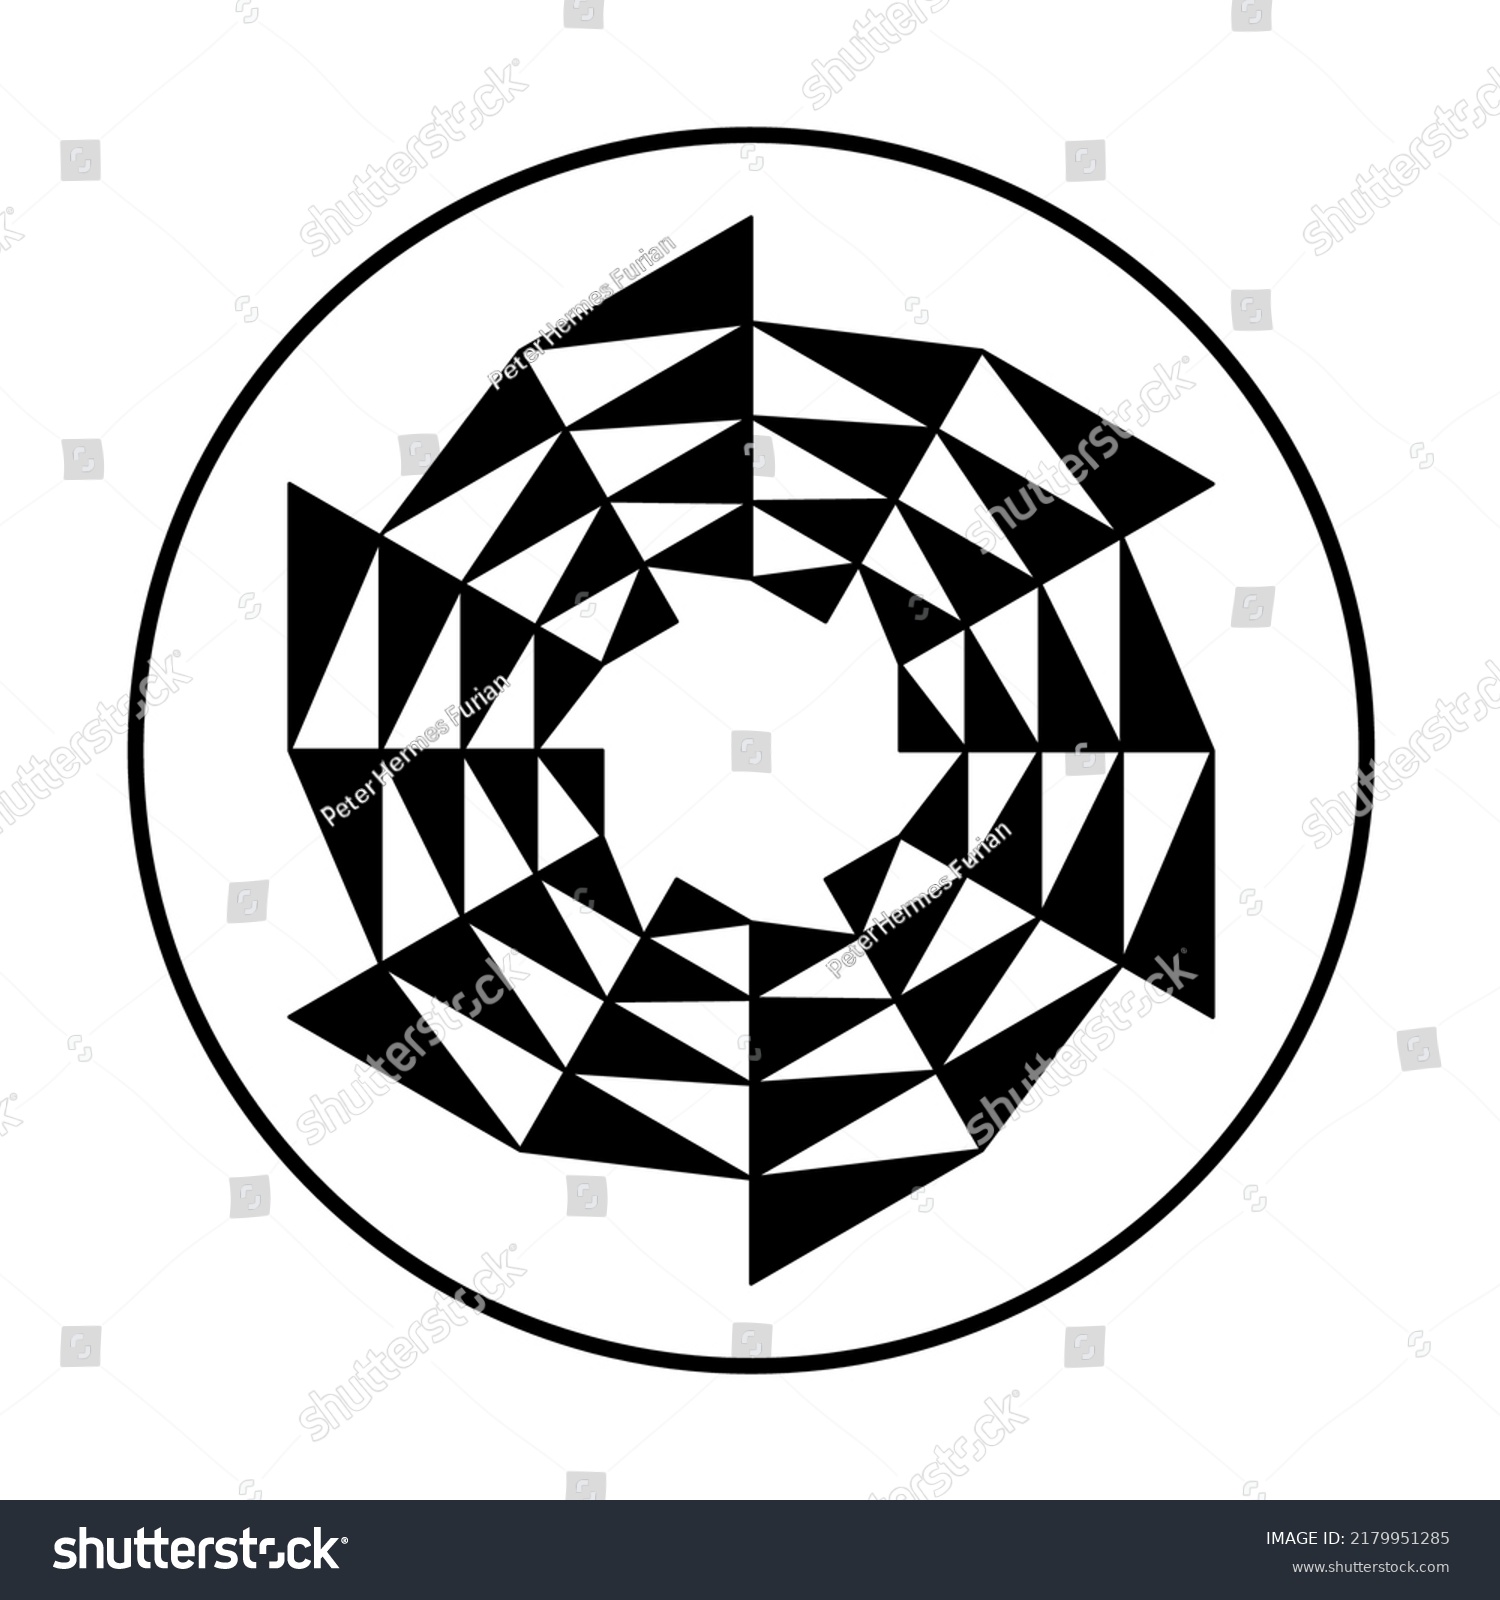 SVG of Circular saw blade shaped, triangle pattern in a circle. Black triangles forming a circular saw blade, moving clockwise, as symbol for change. Modeled on a crop circle pattern found at Barbury Castle. svg